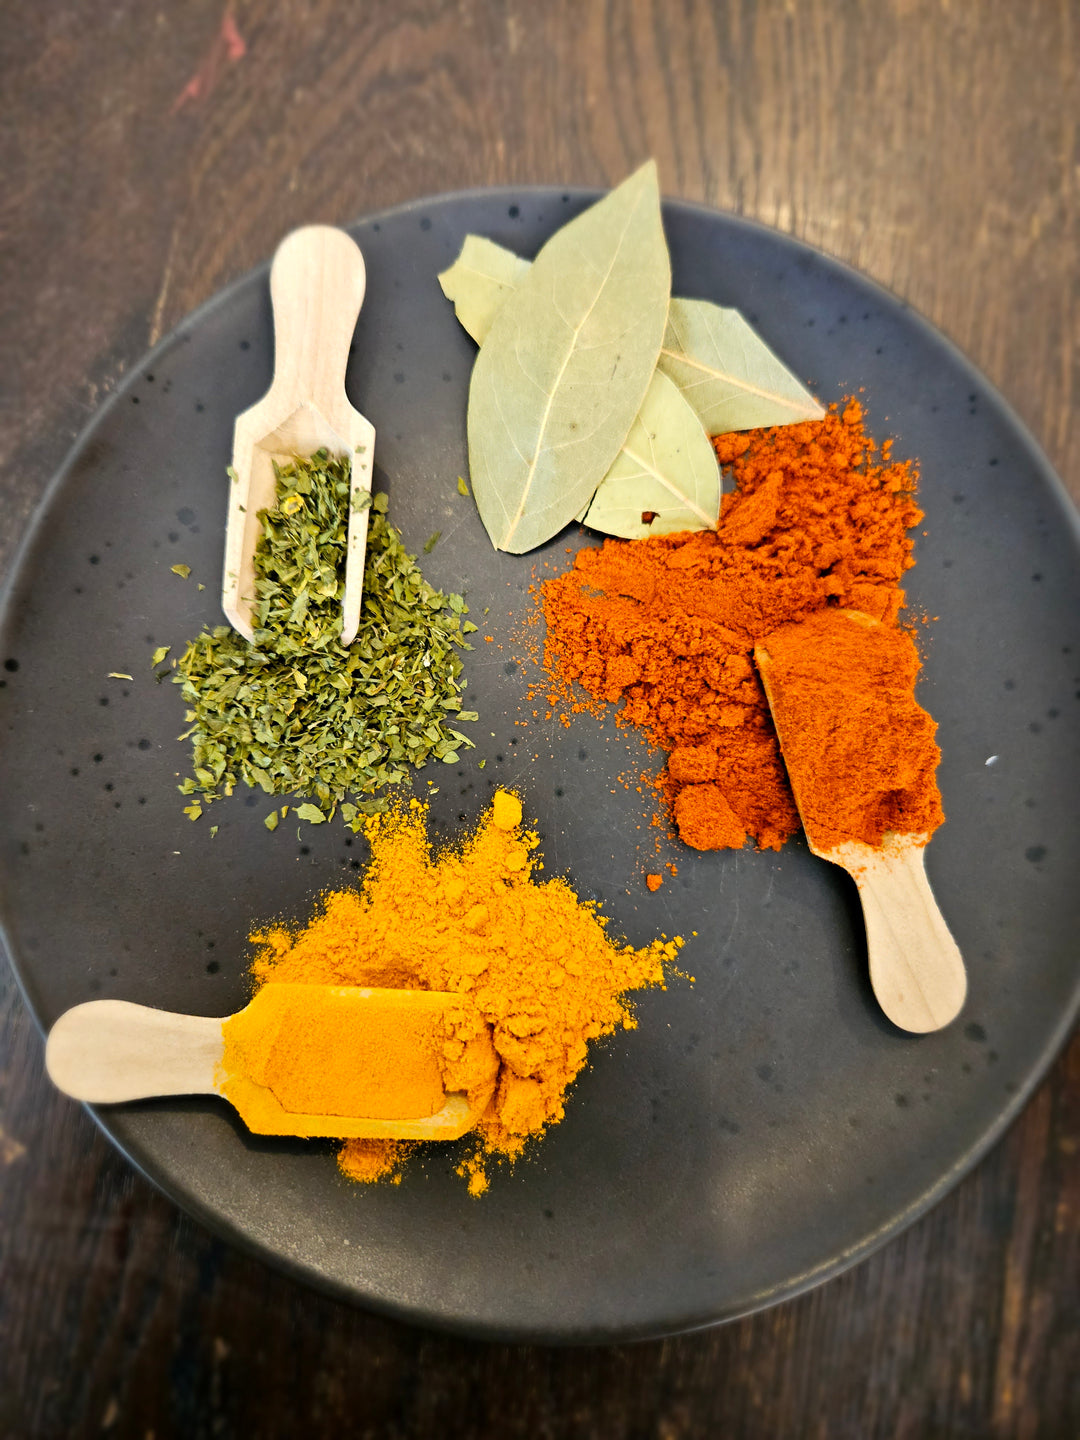 Herbs, Spices and Seasonings